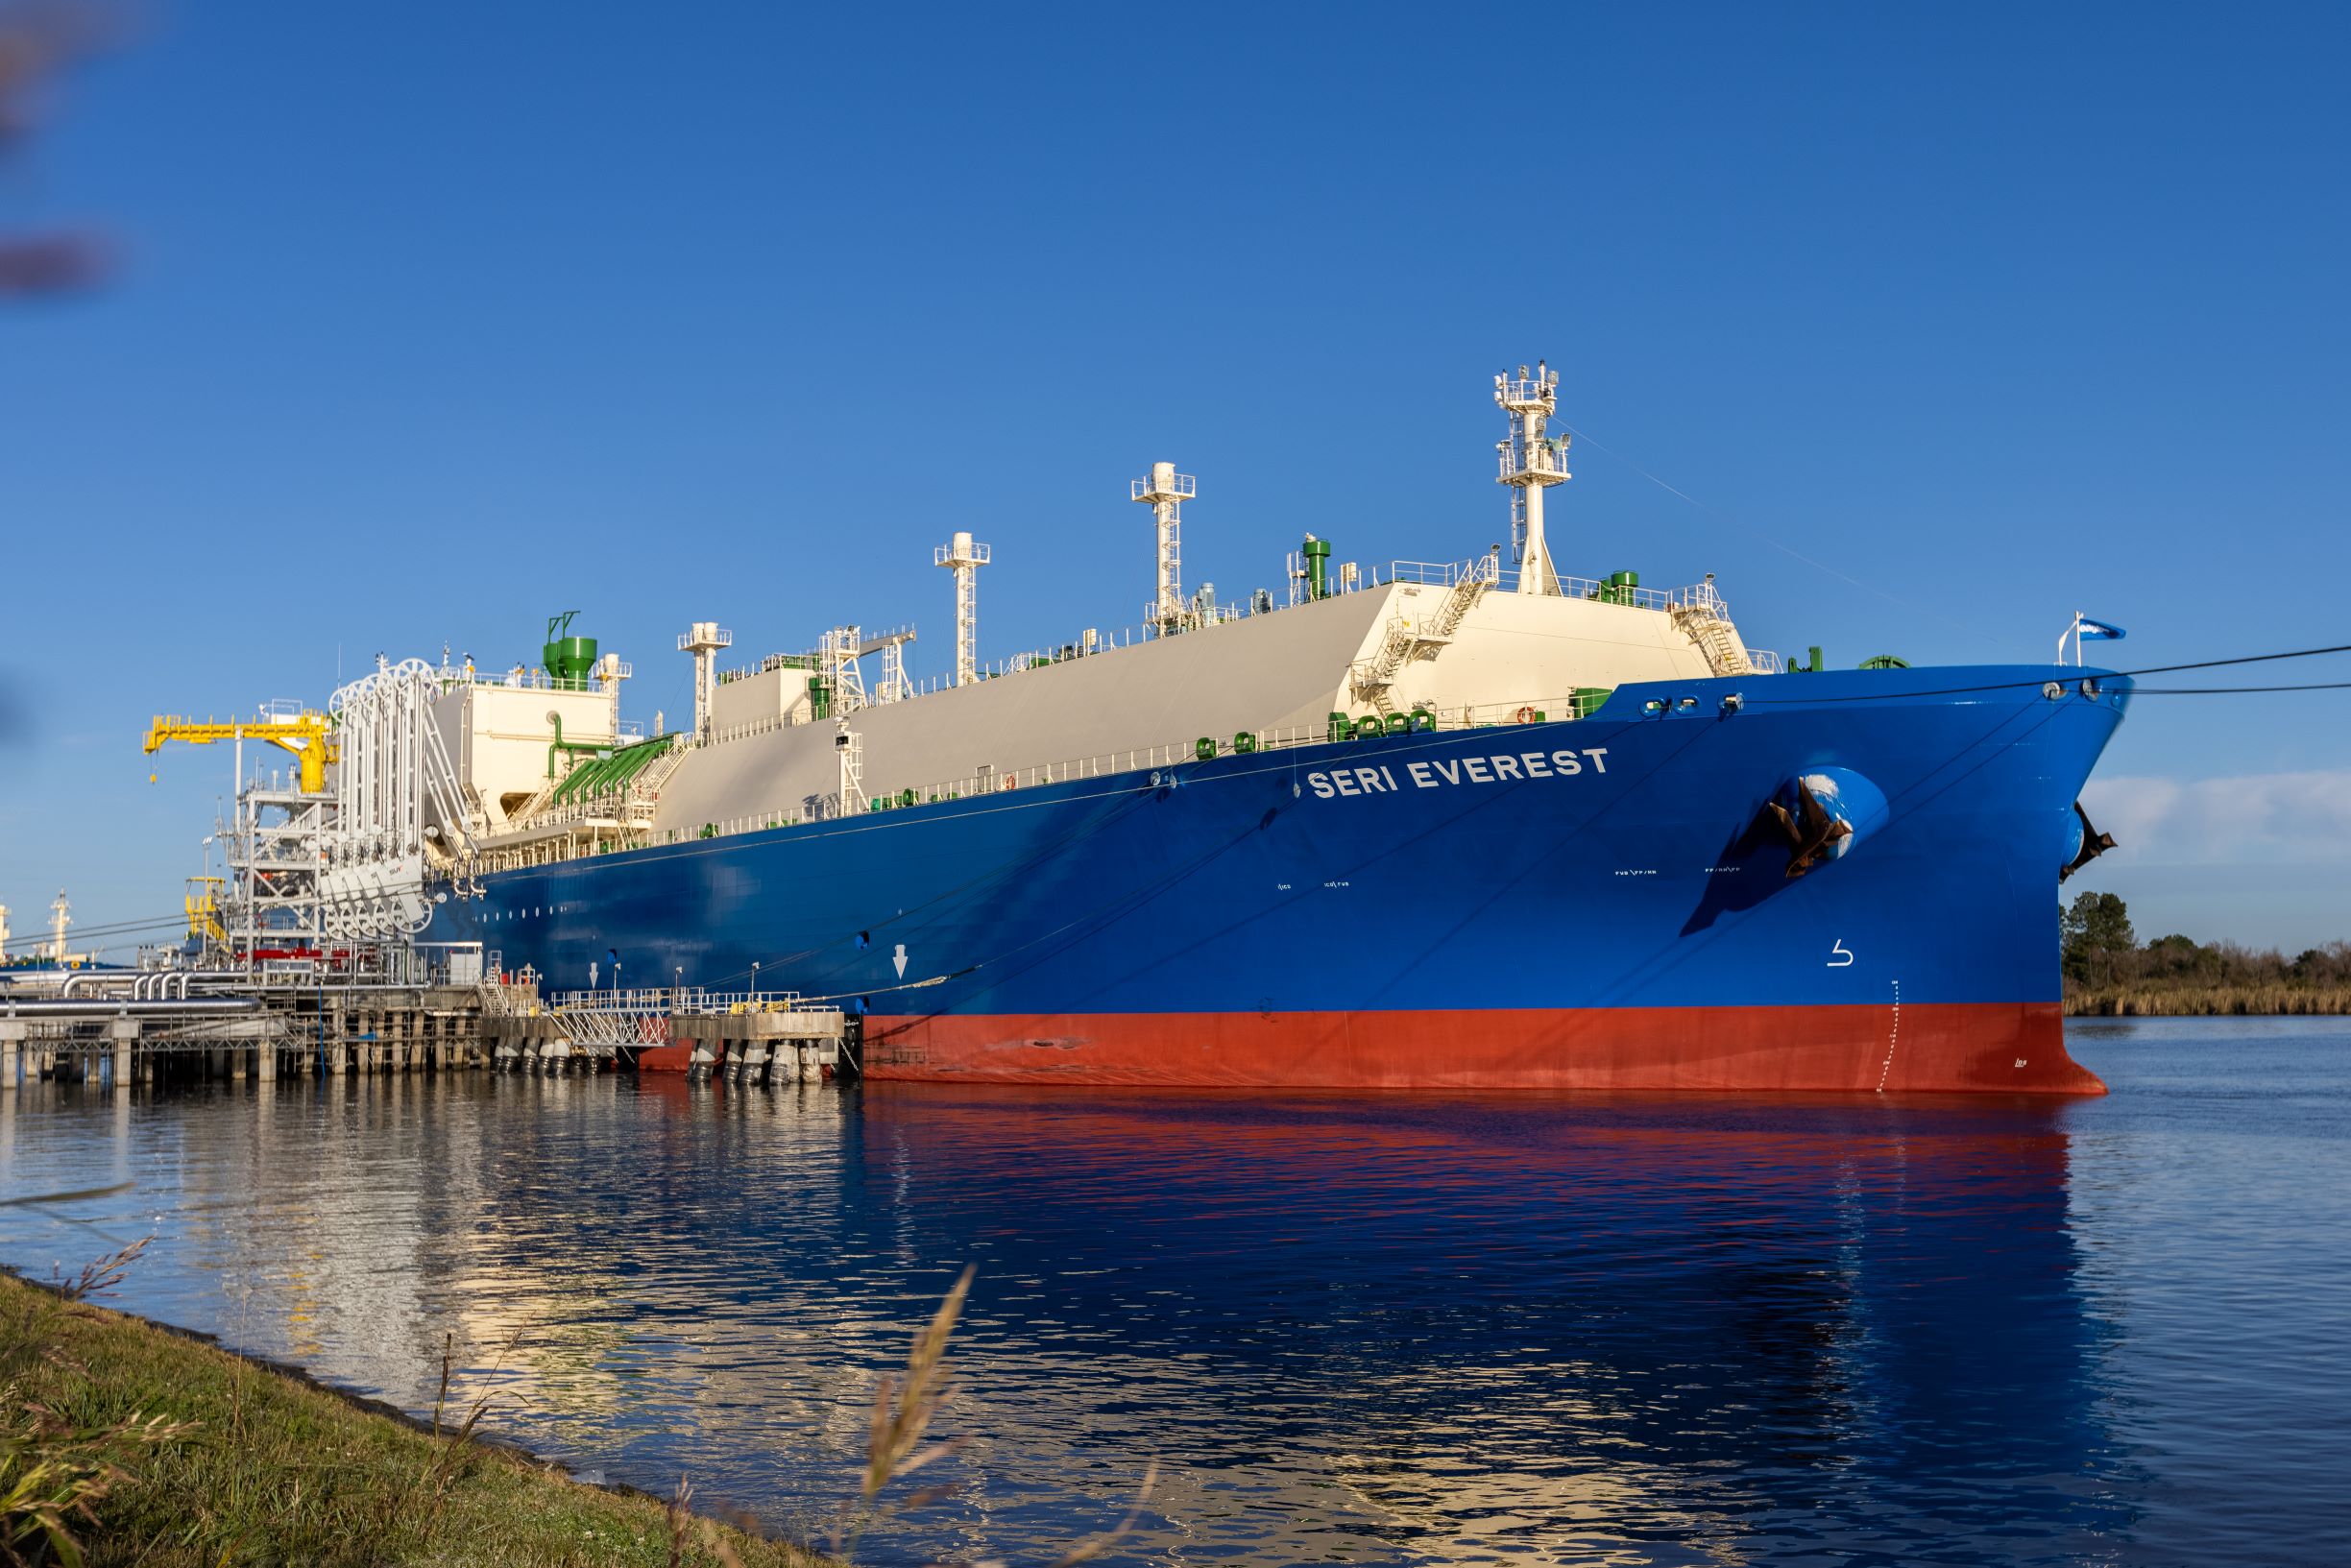 MISC's Seri Everest delivers ethane cargo in China